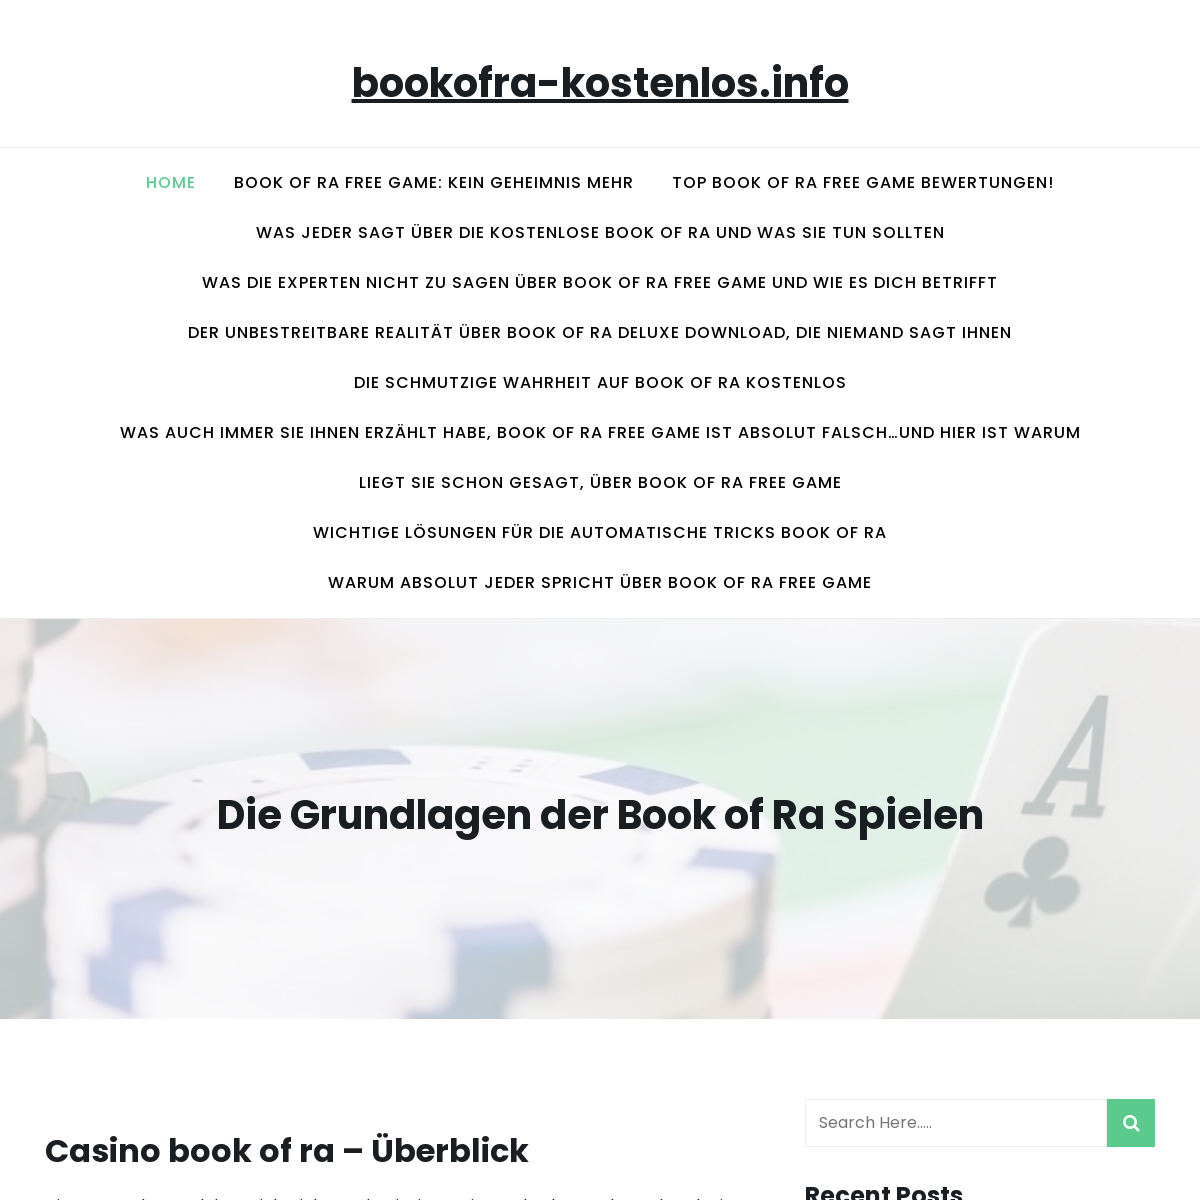 A complete backup of bookofra-kostenlos.info